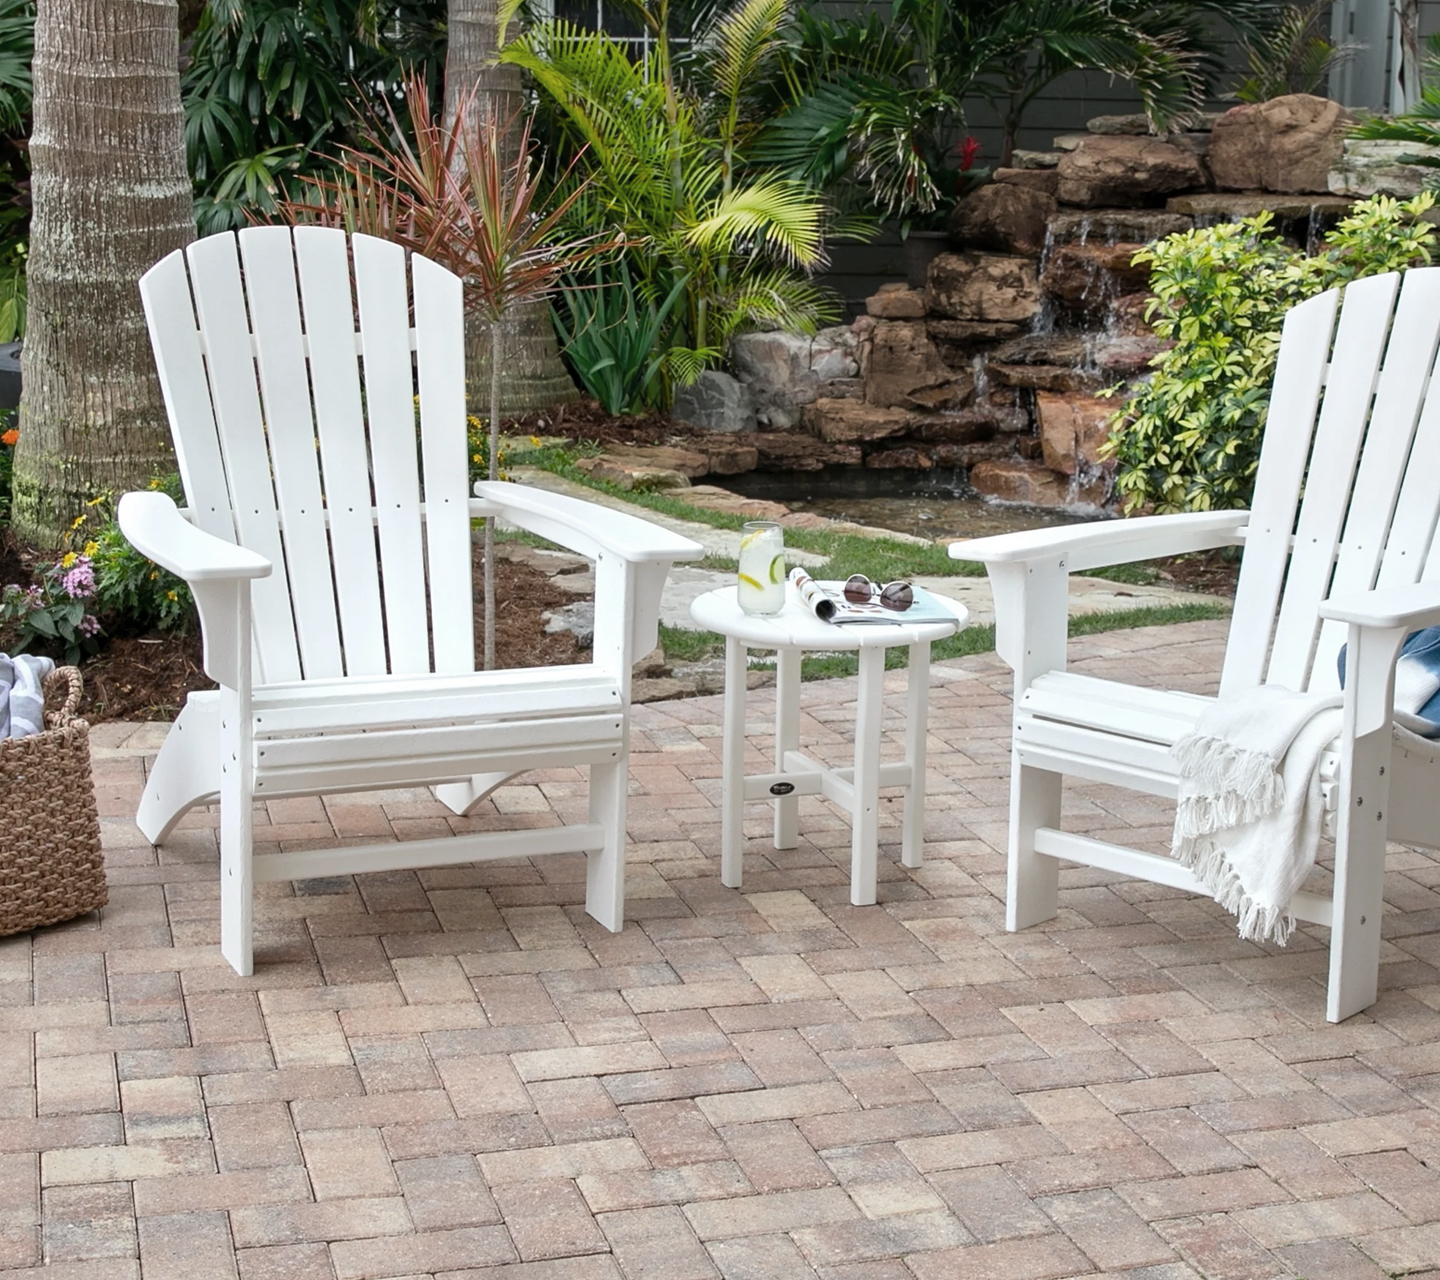 two treex white chairs on patio